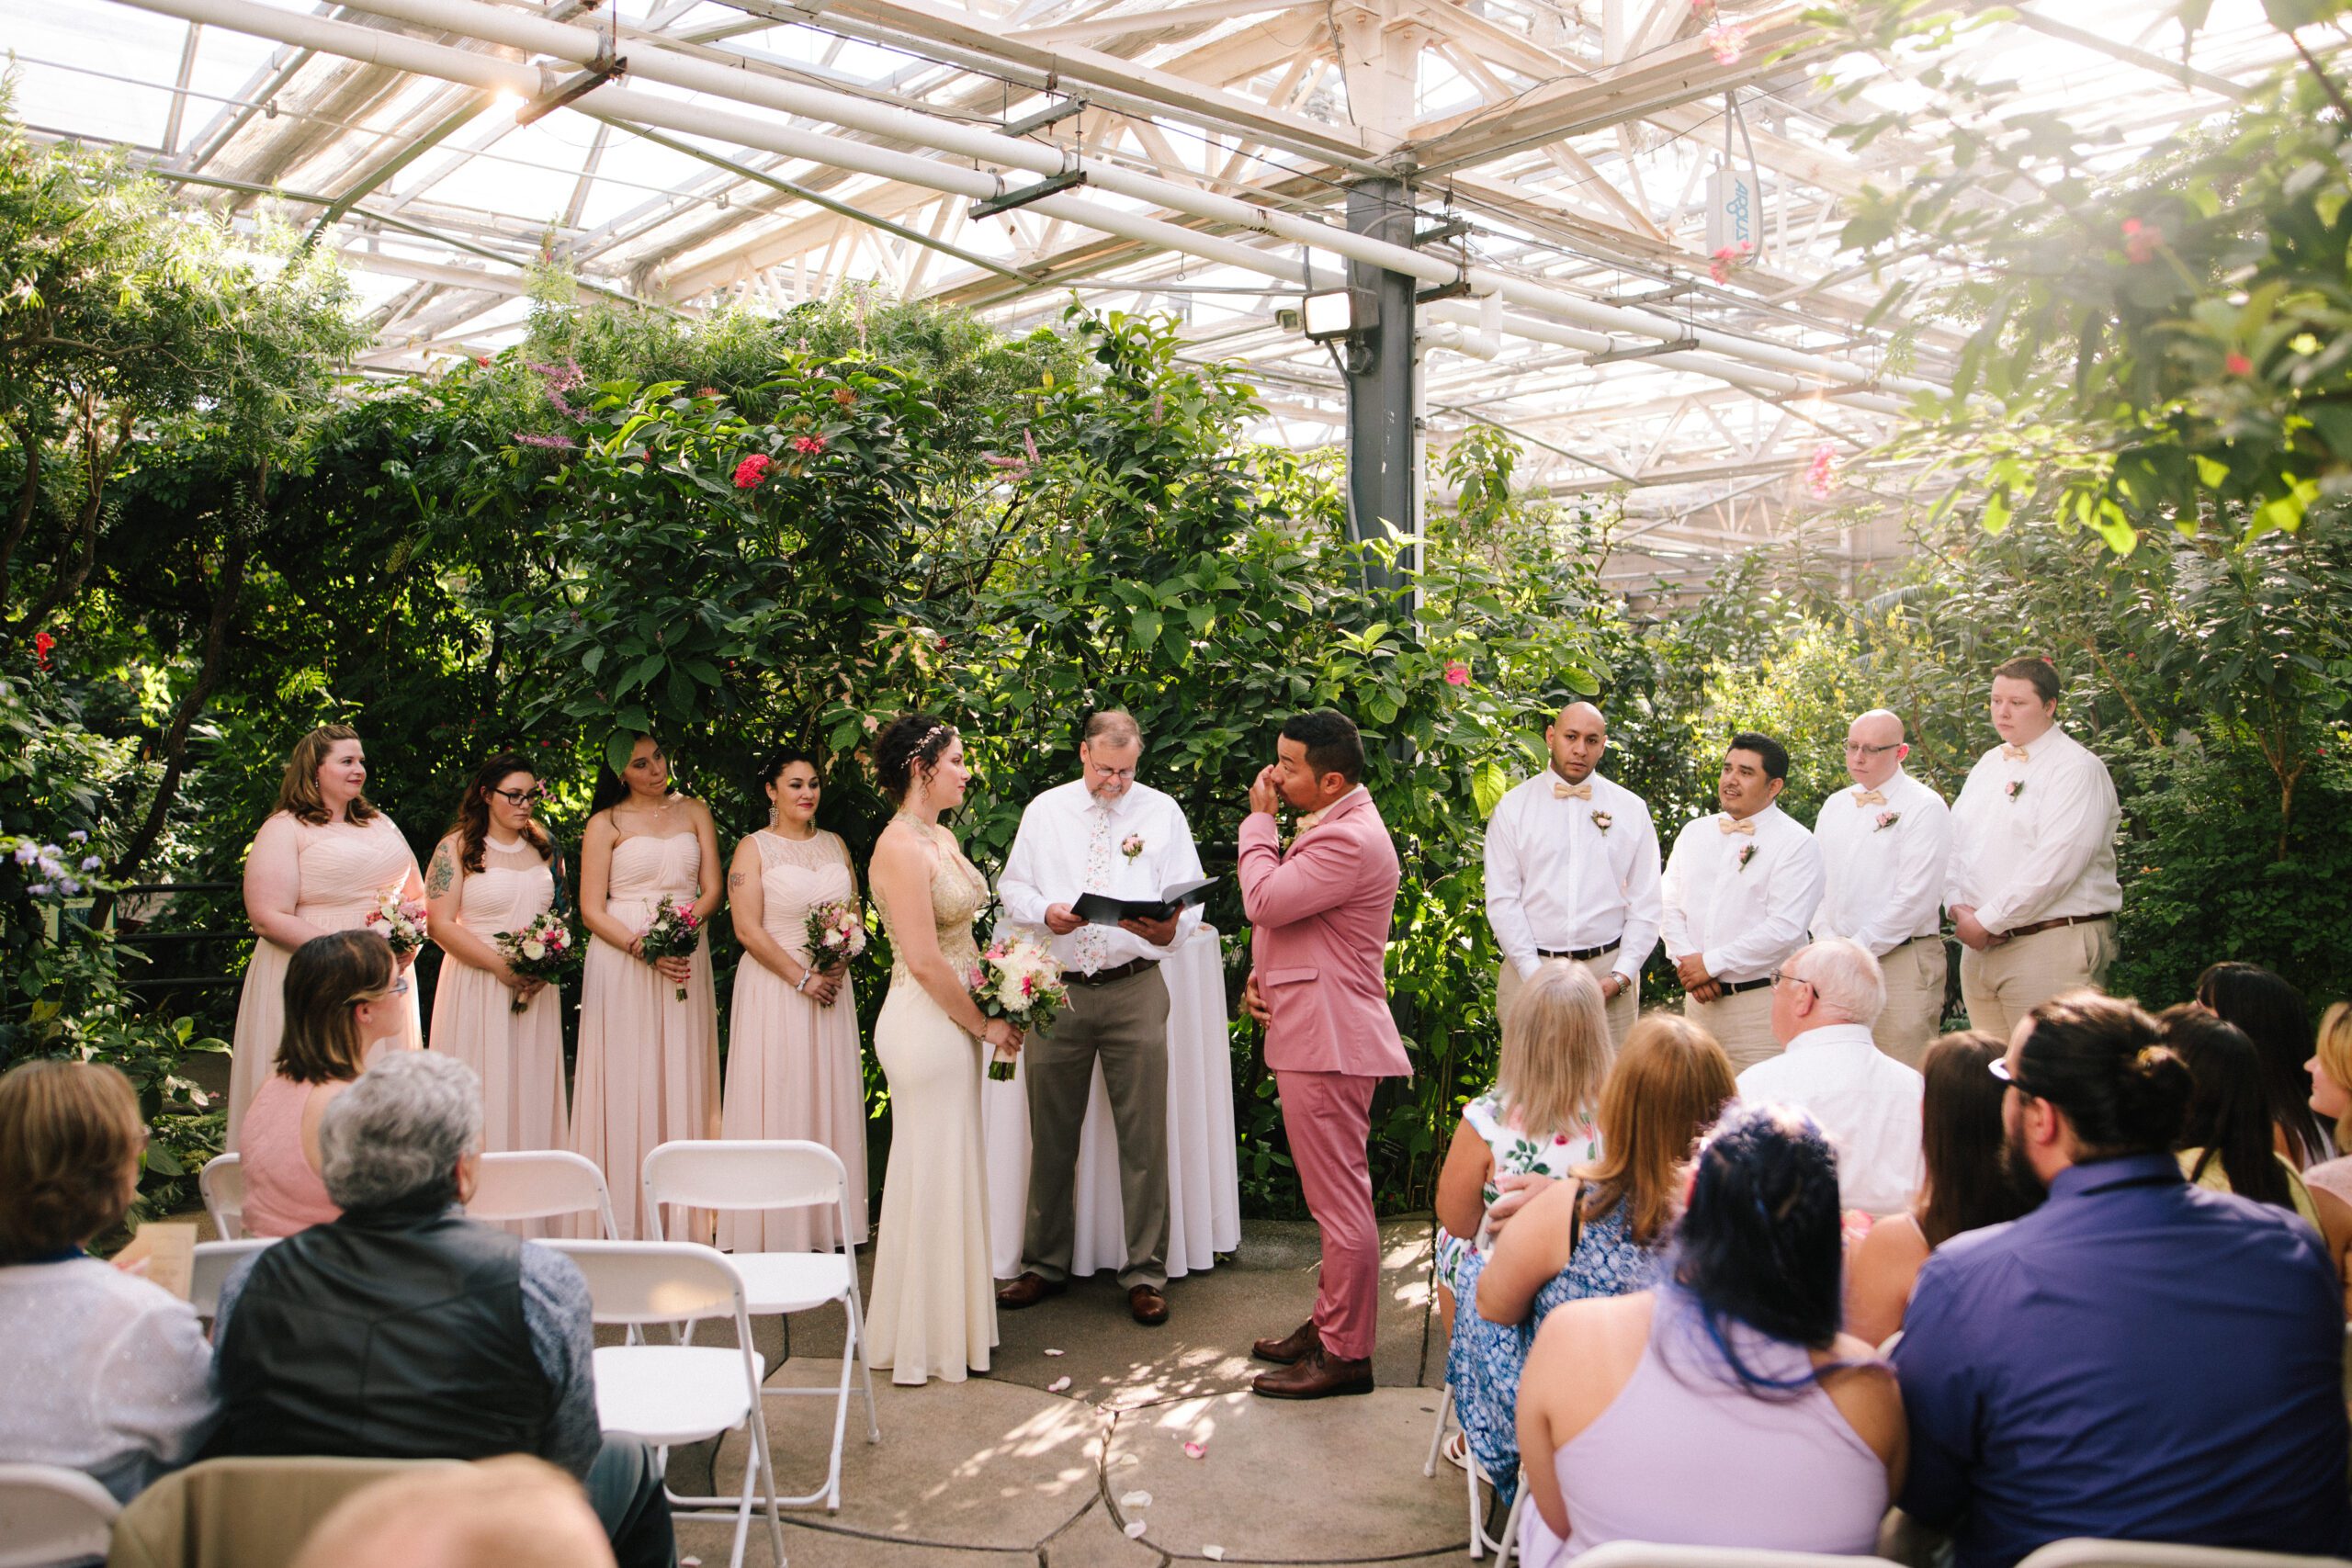 A beautiful portrait of the entire wedding party during their Butterfly Pavilion wedding.